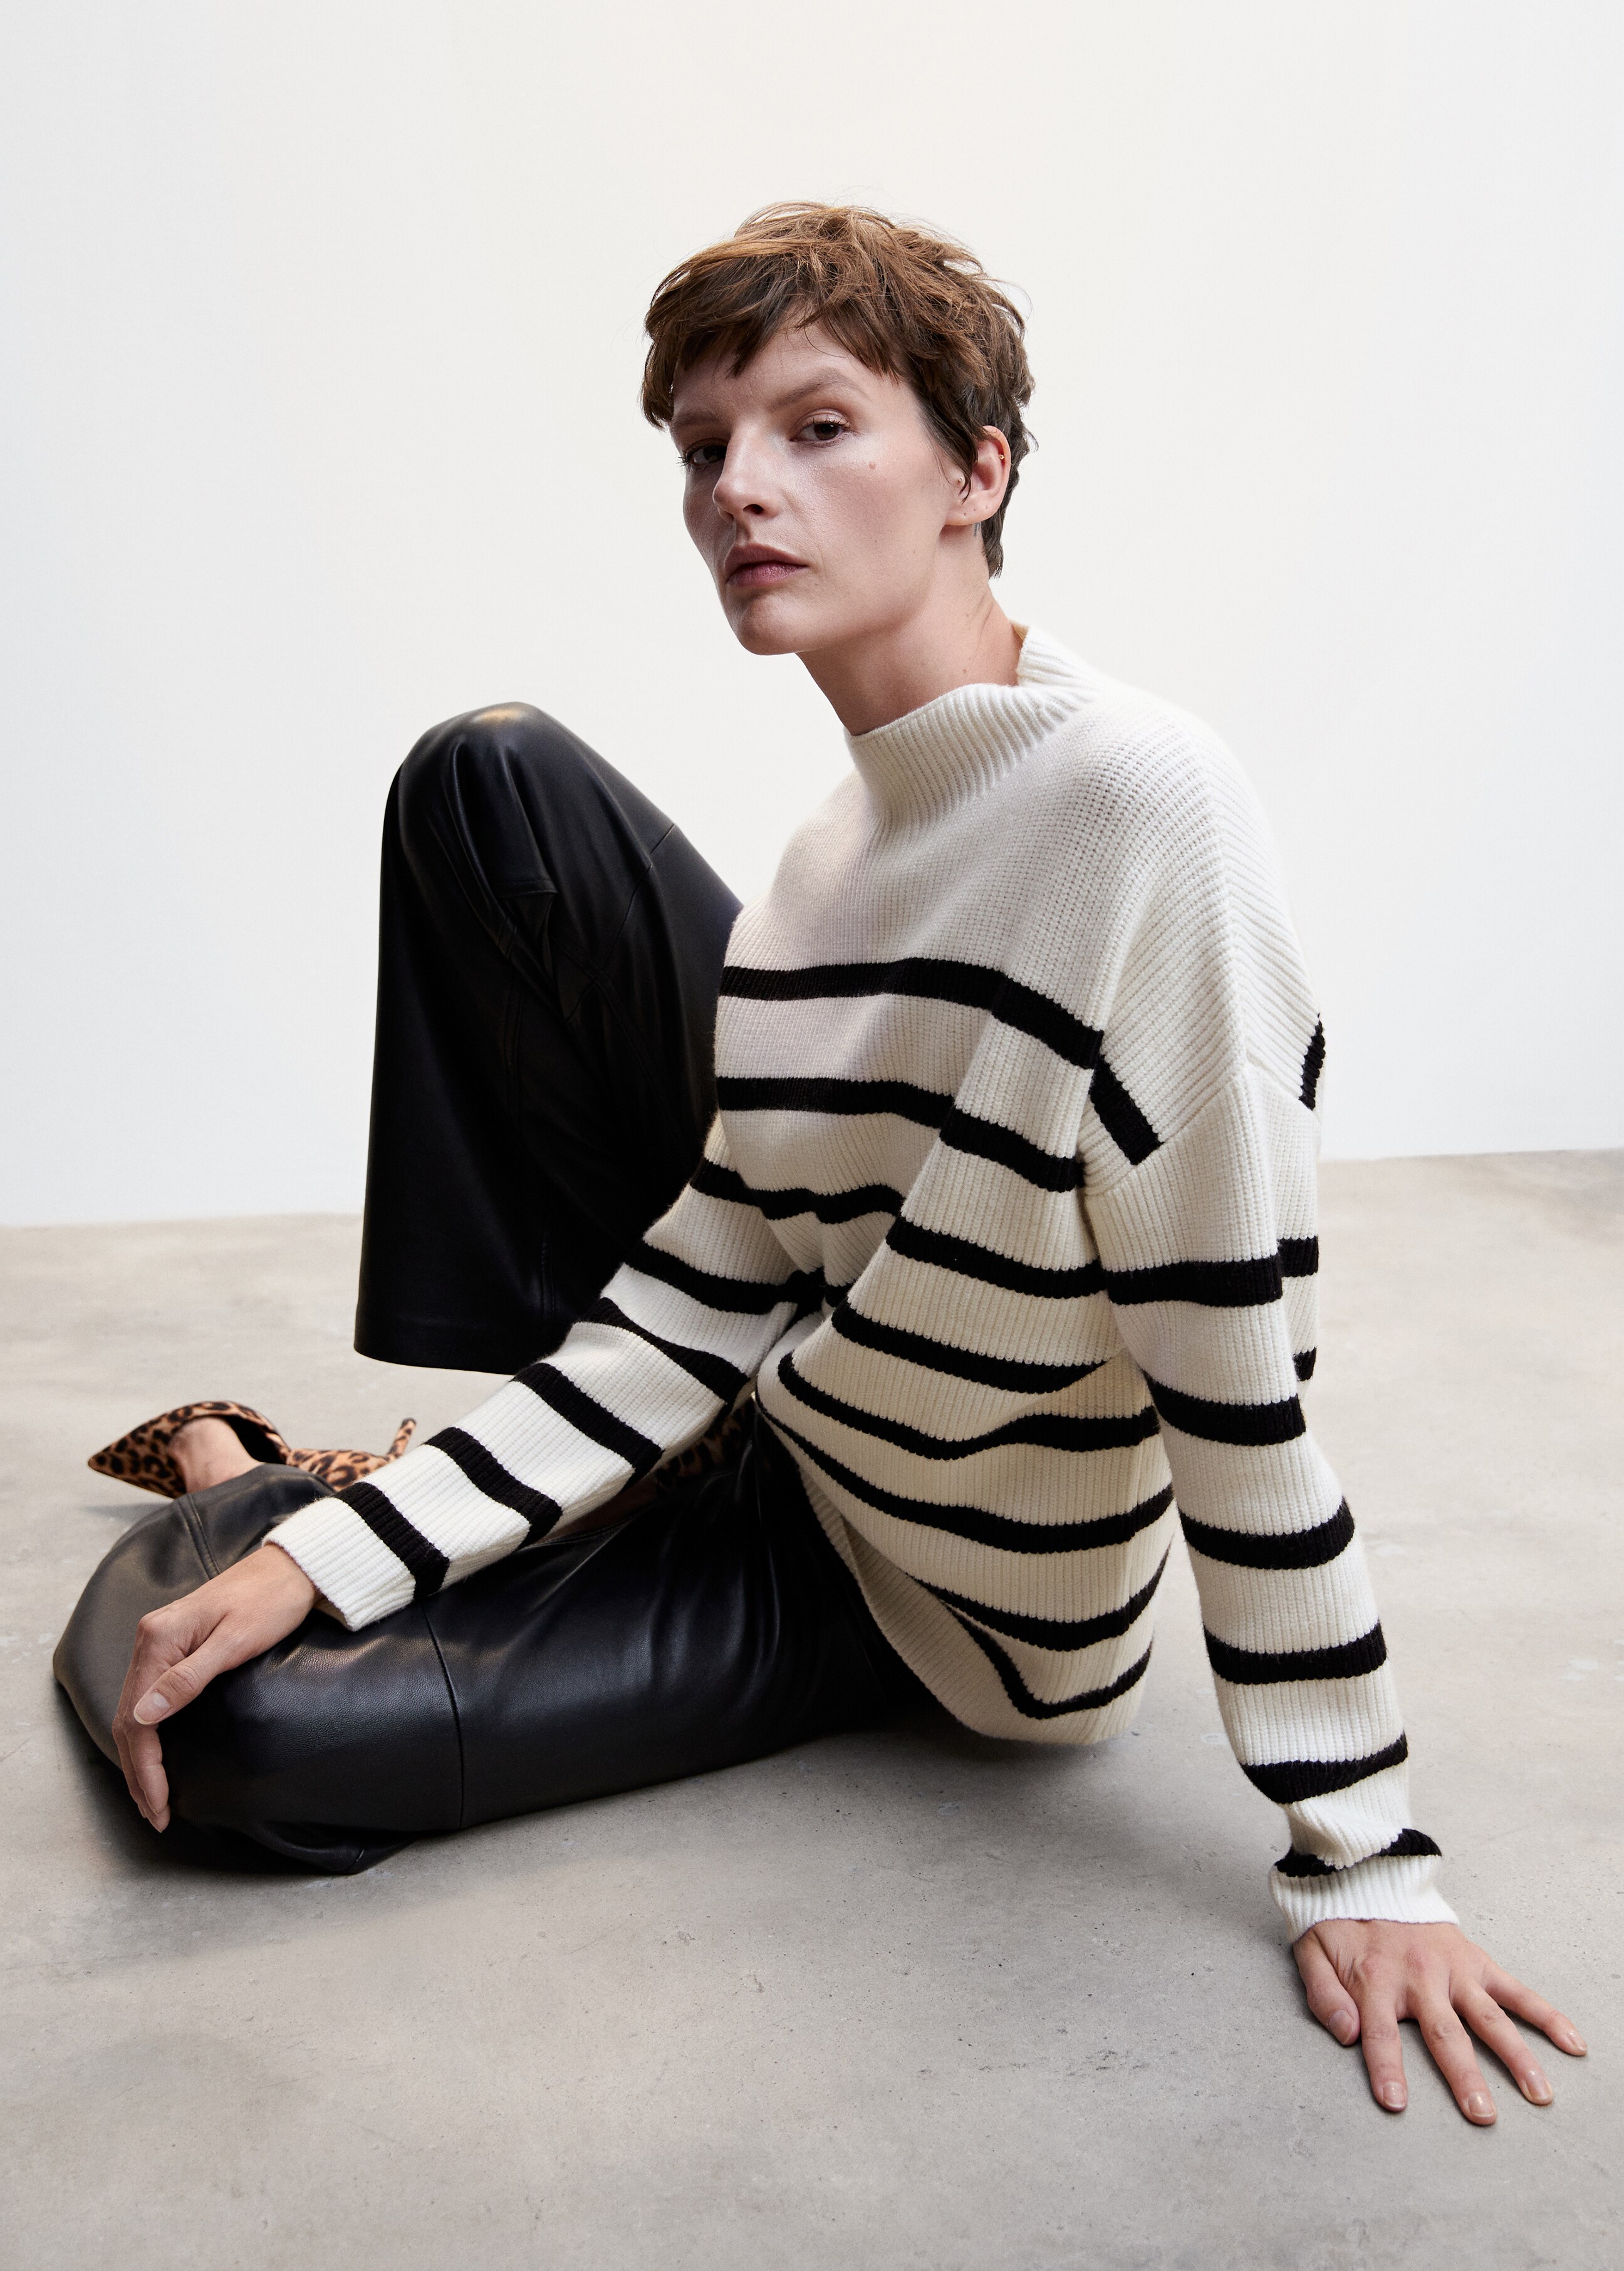 Striped rib sweater - Details of the article 2